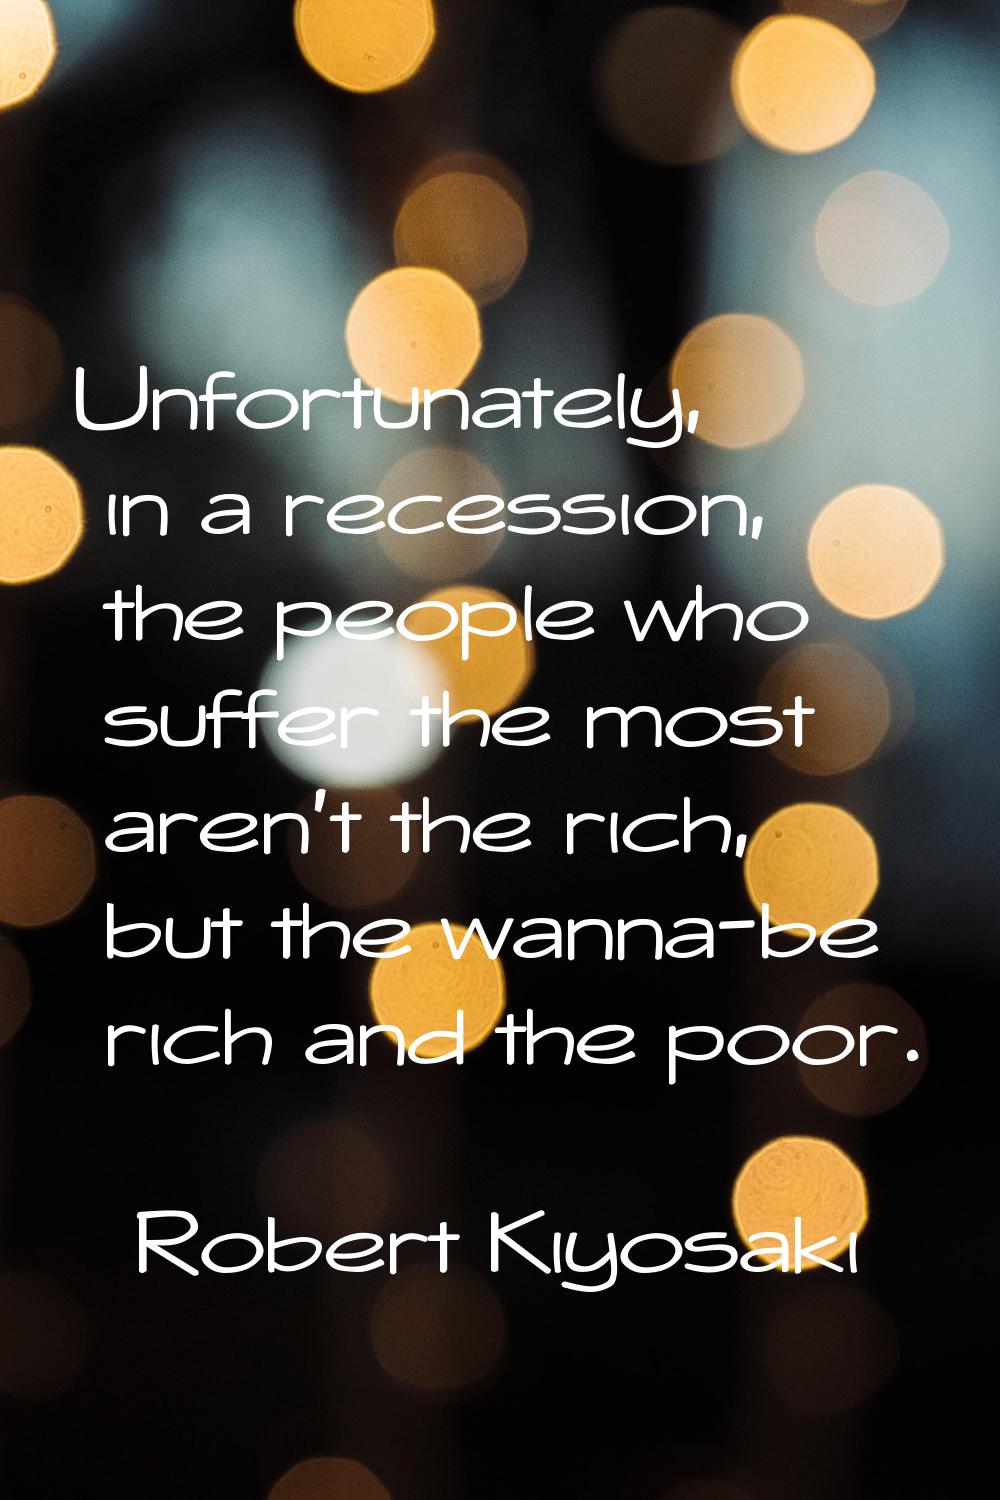 Unfortunately, in a recession, the people who suffer the most aren't the rich, but the wanna-be ric